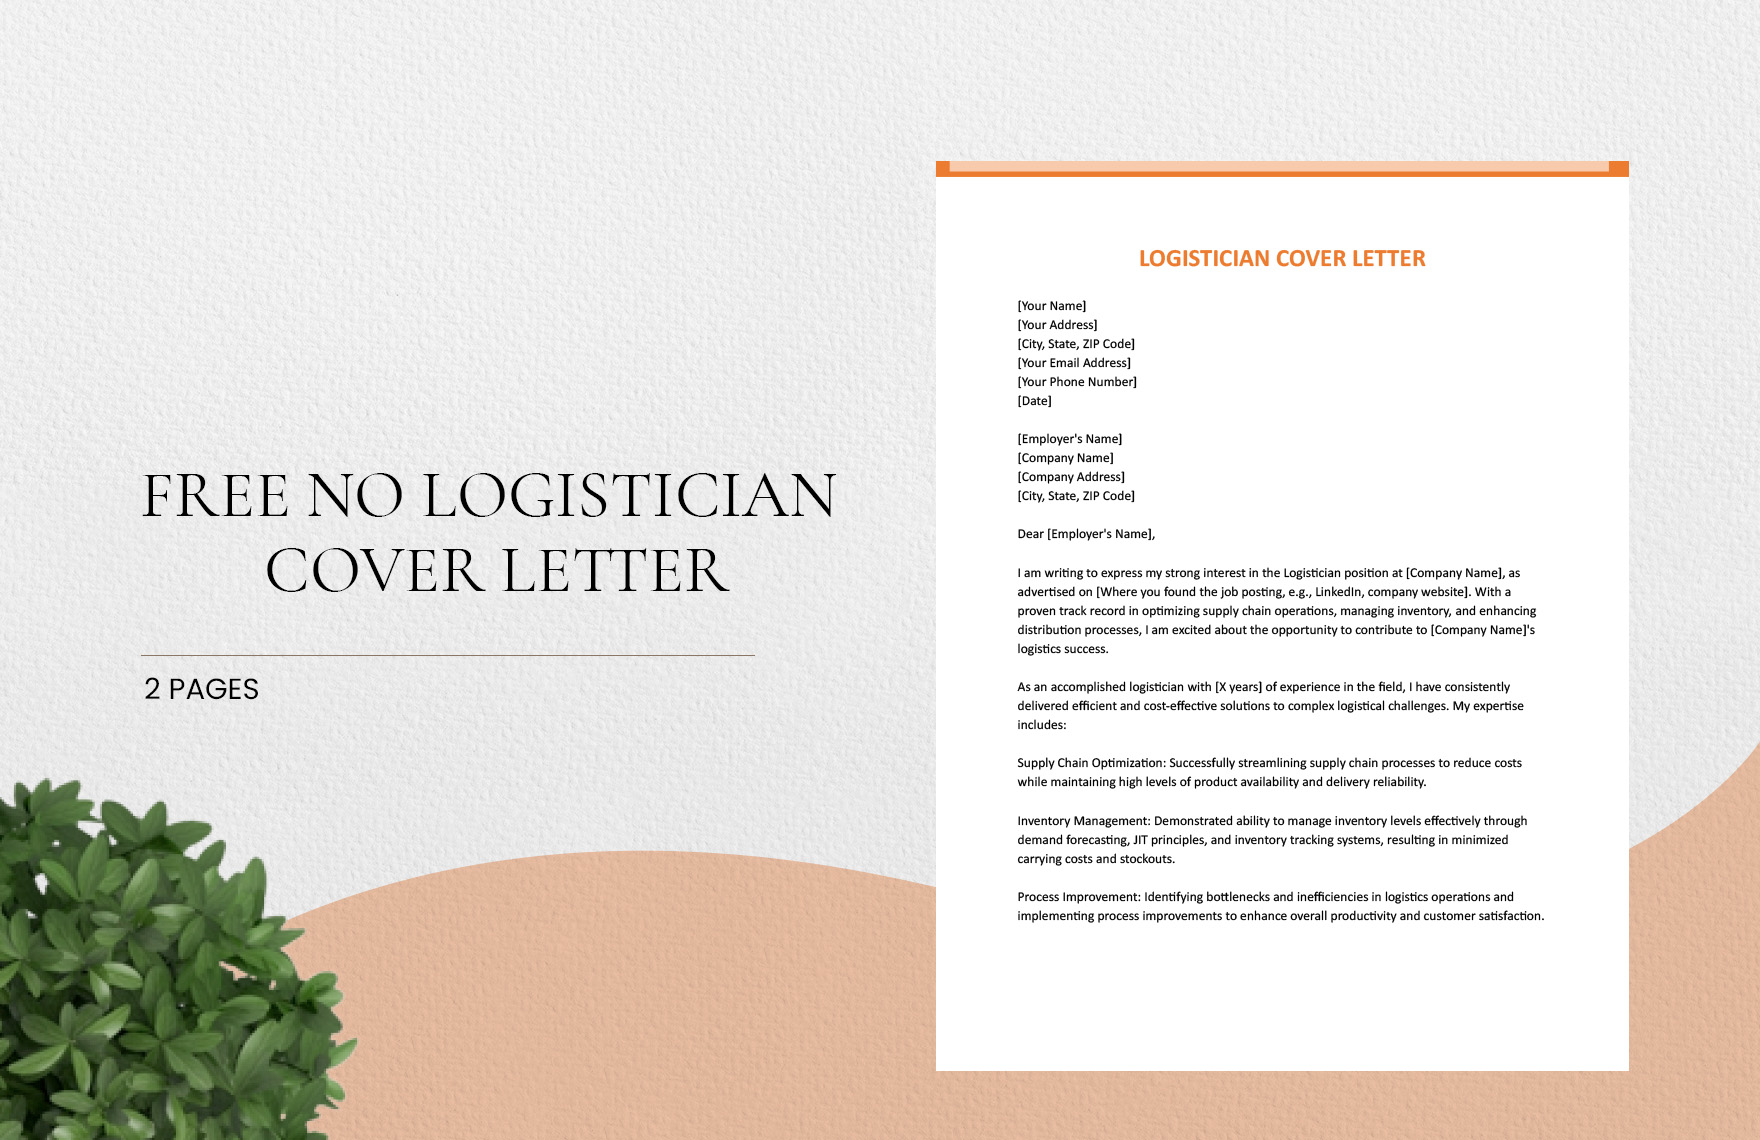 Logistician Cover Letter in Word, Google Docs